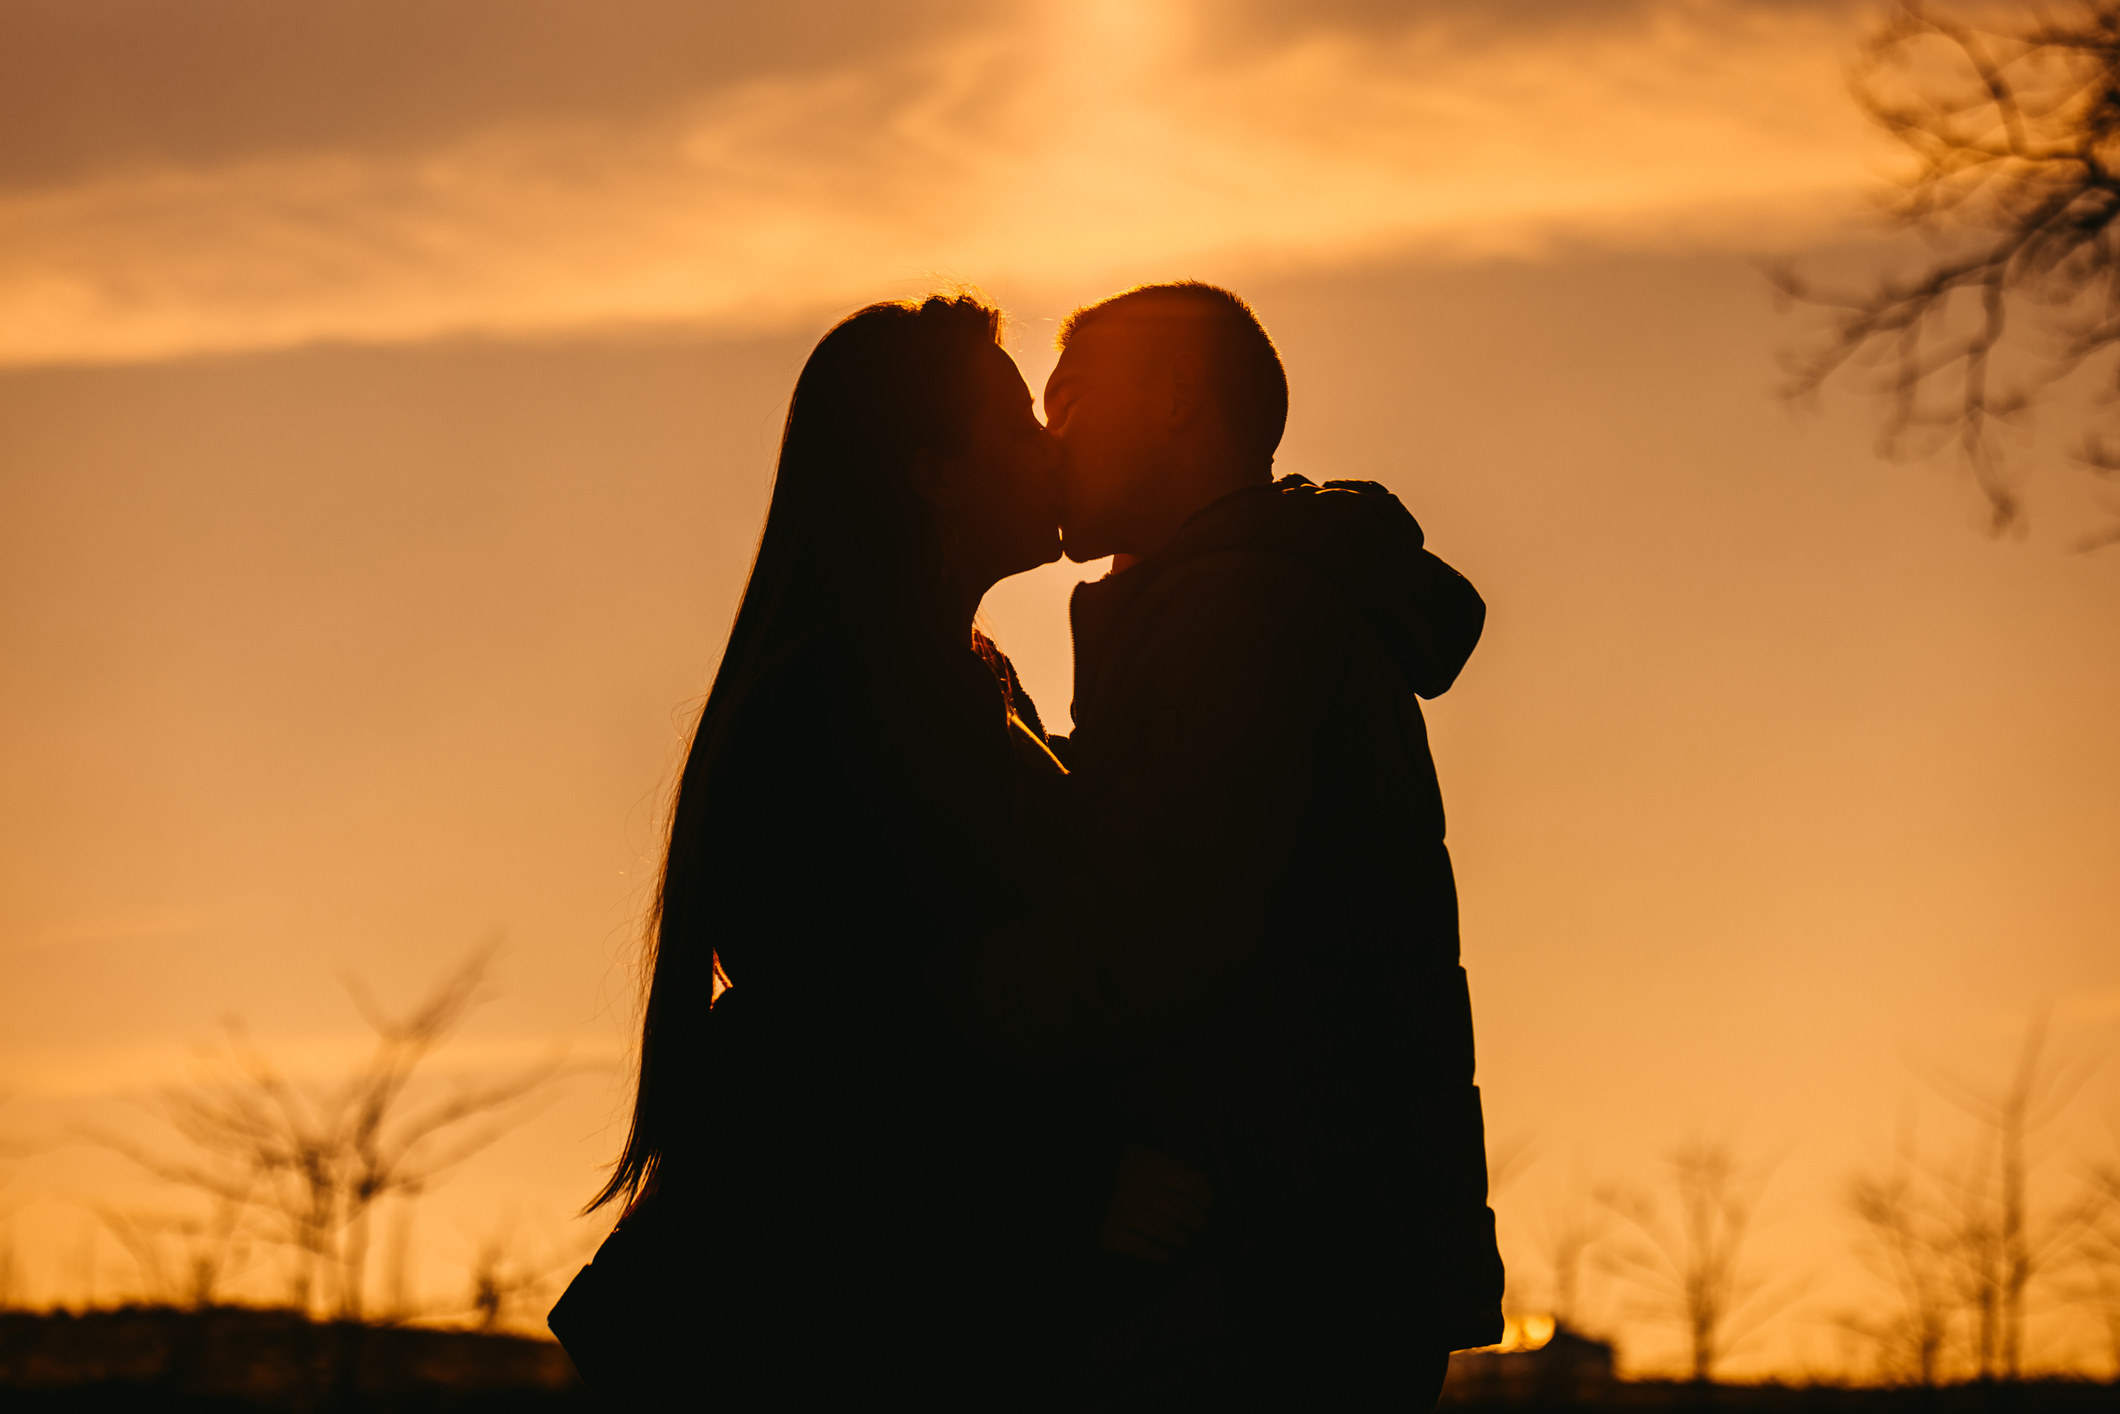 Two people kissing in the sunset